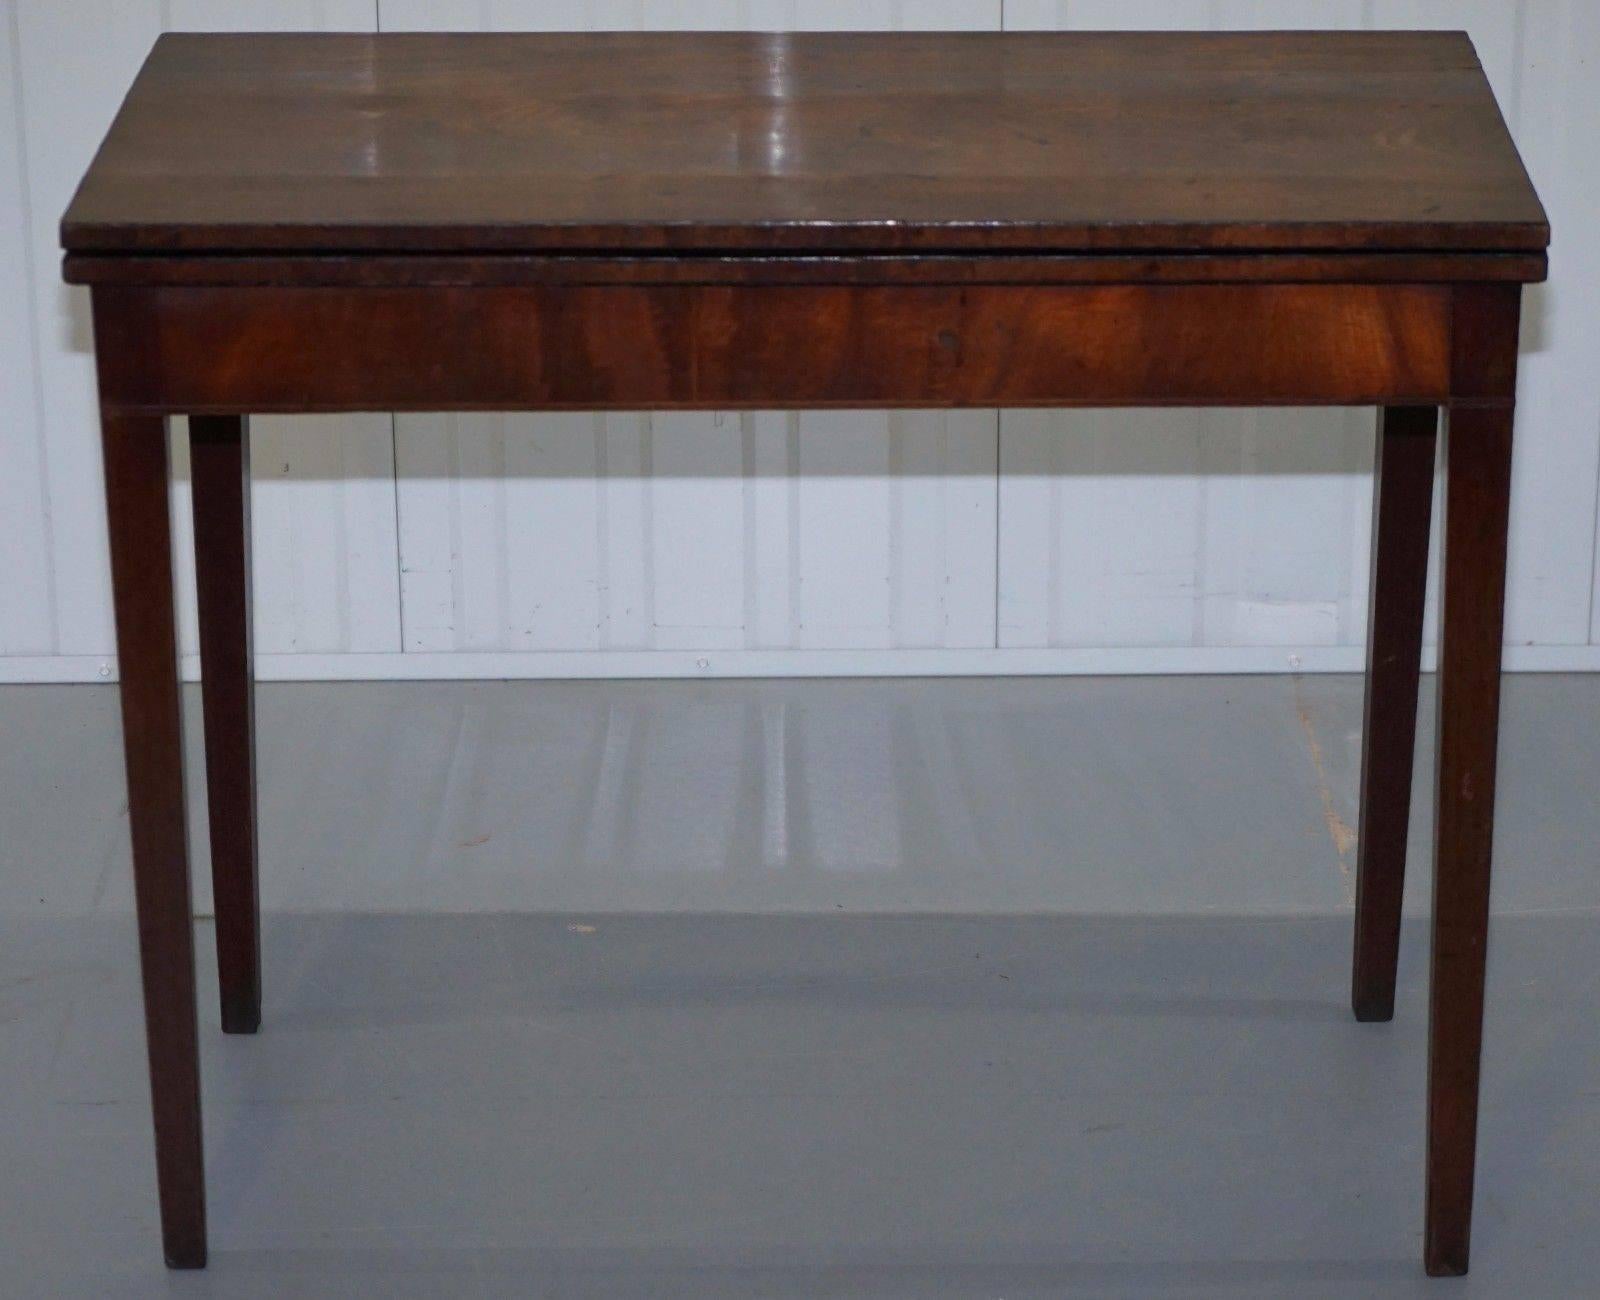 Lovely circa 1800 Georgian mahogany Tea table

Georgian Mahogany Country Antique Tea Table
 
Dating from around 1800 in the Georgian period this country antique tea table is made from mahogany. Simple but practical in design it has a rectangular